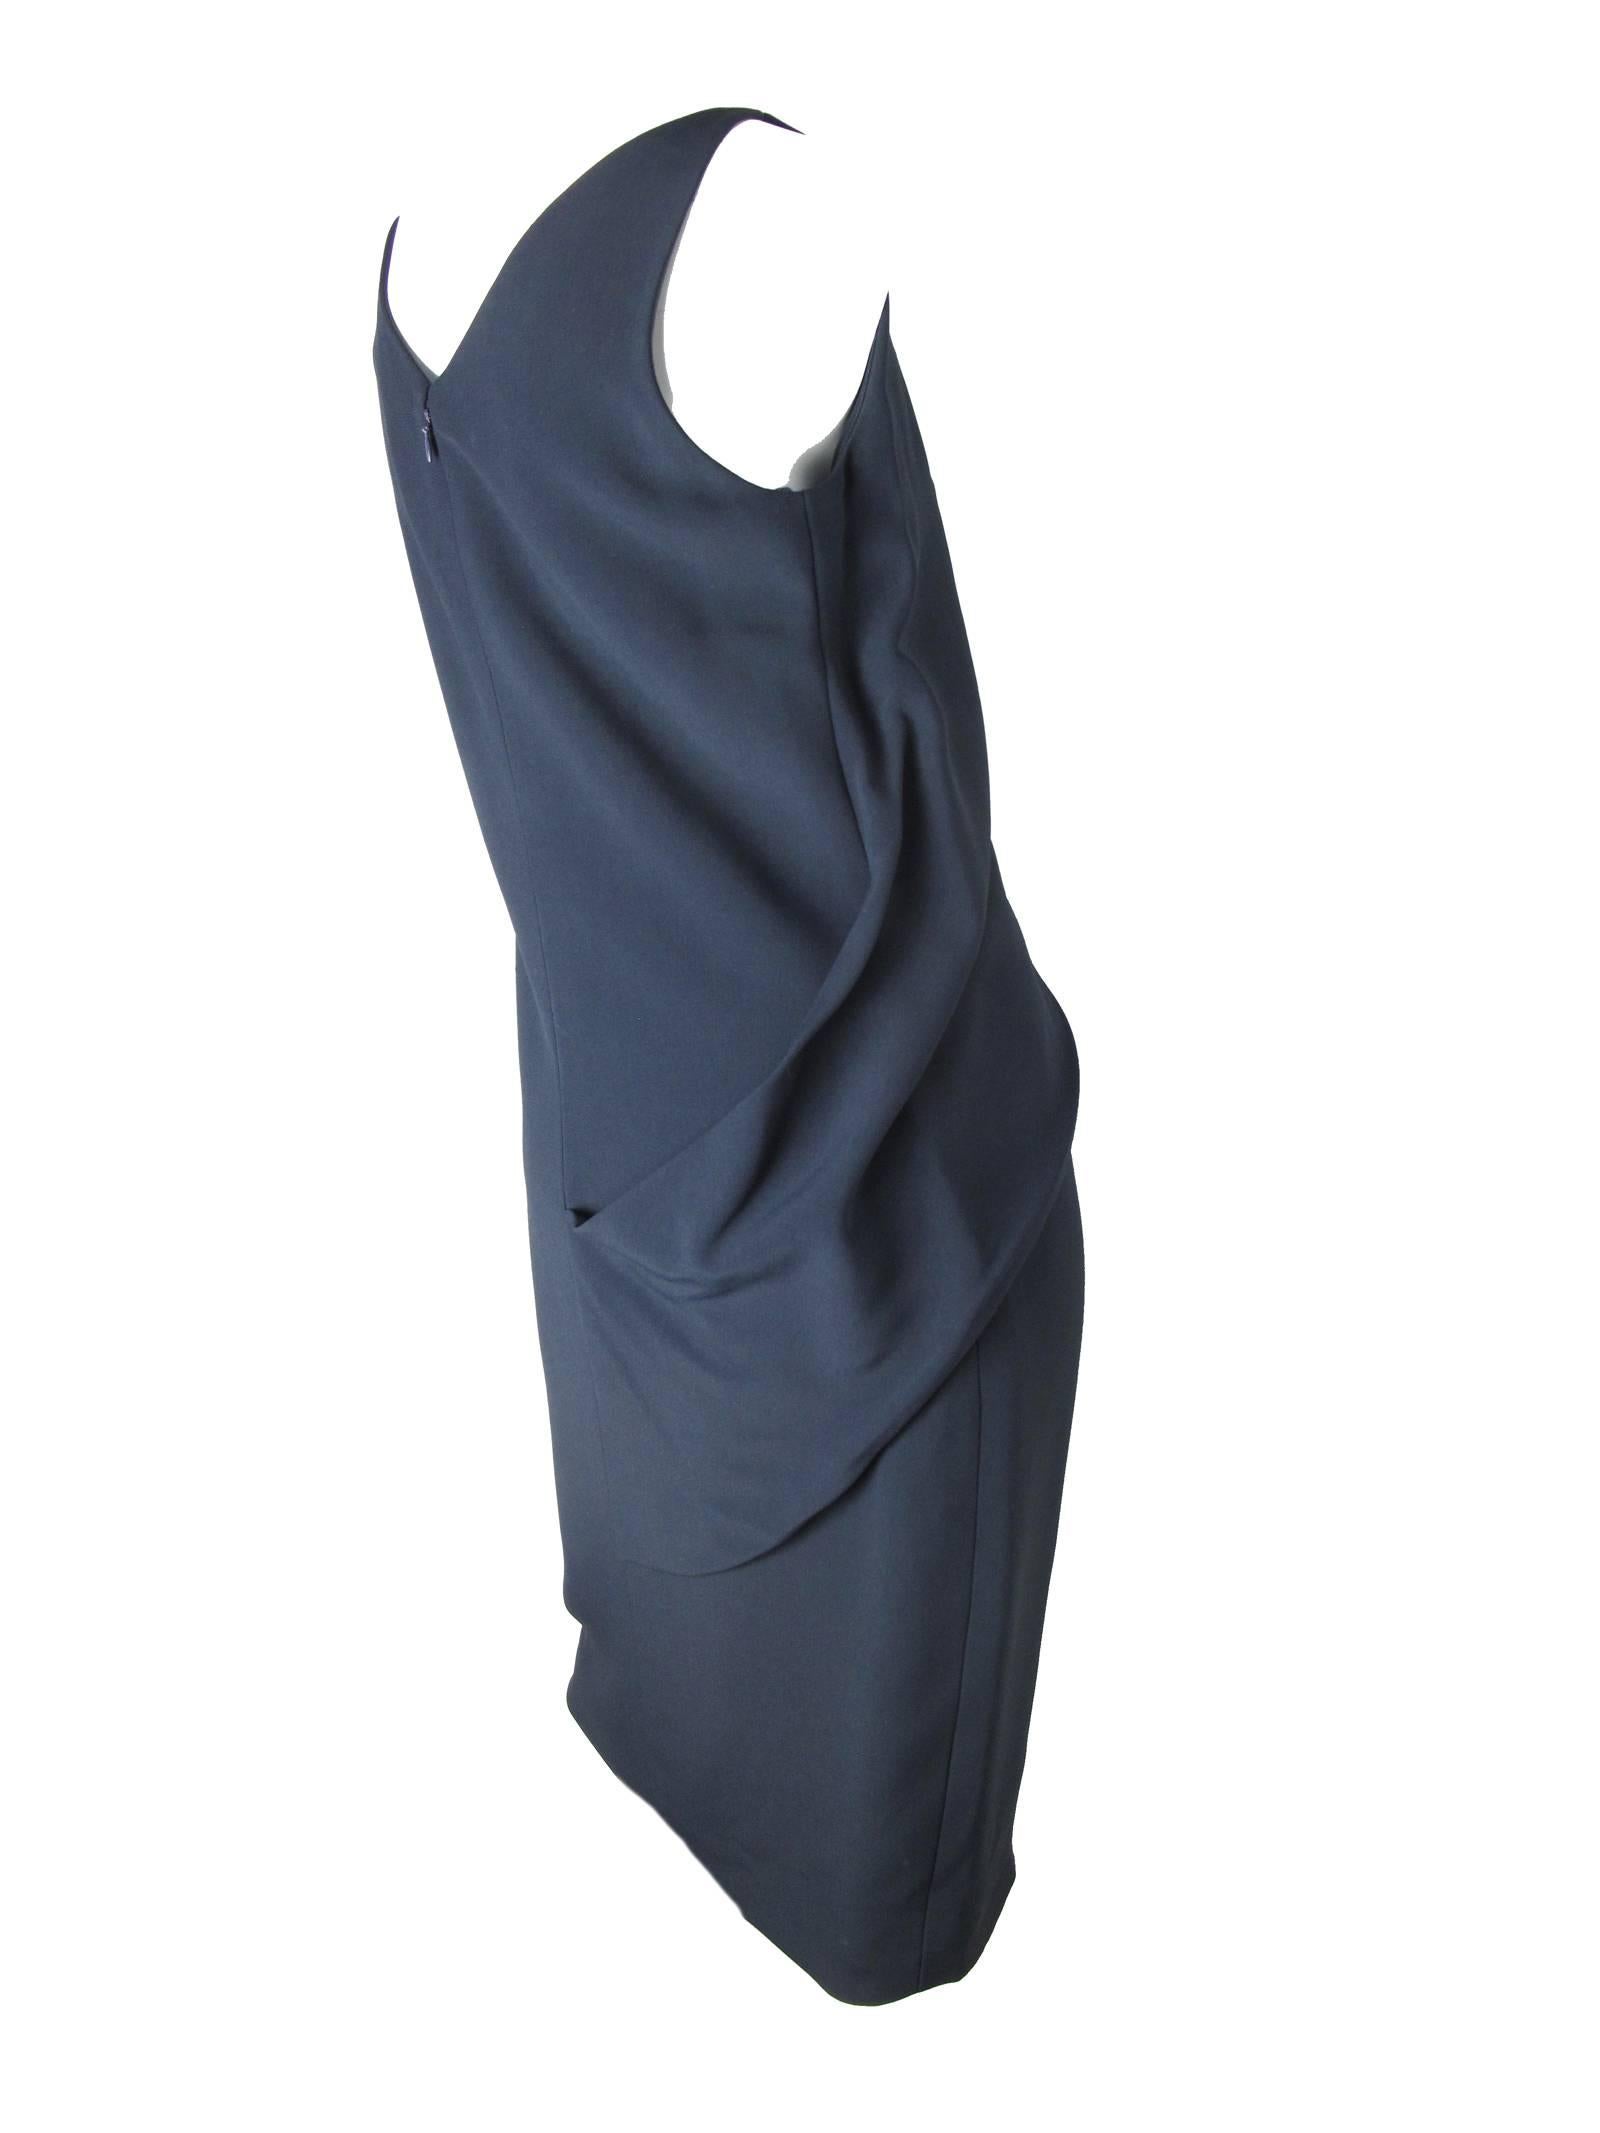 Balenciaga “Le Dix” navy dress, sleeveless. Silk lined, Acetate and Viscose fabric. Size 42 / US 8 ( mannequin is a size 6 ) 
34" bust, 35" waist, 40" length.

We accept returns for refund, please see our terms.  We offer free